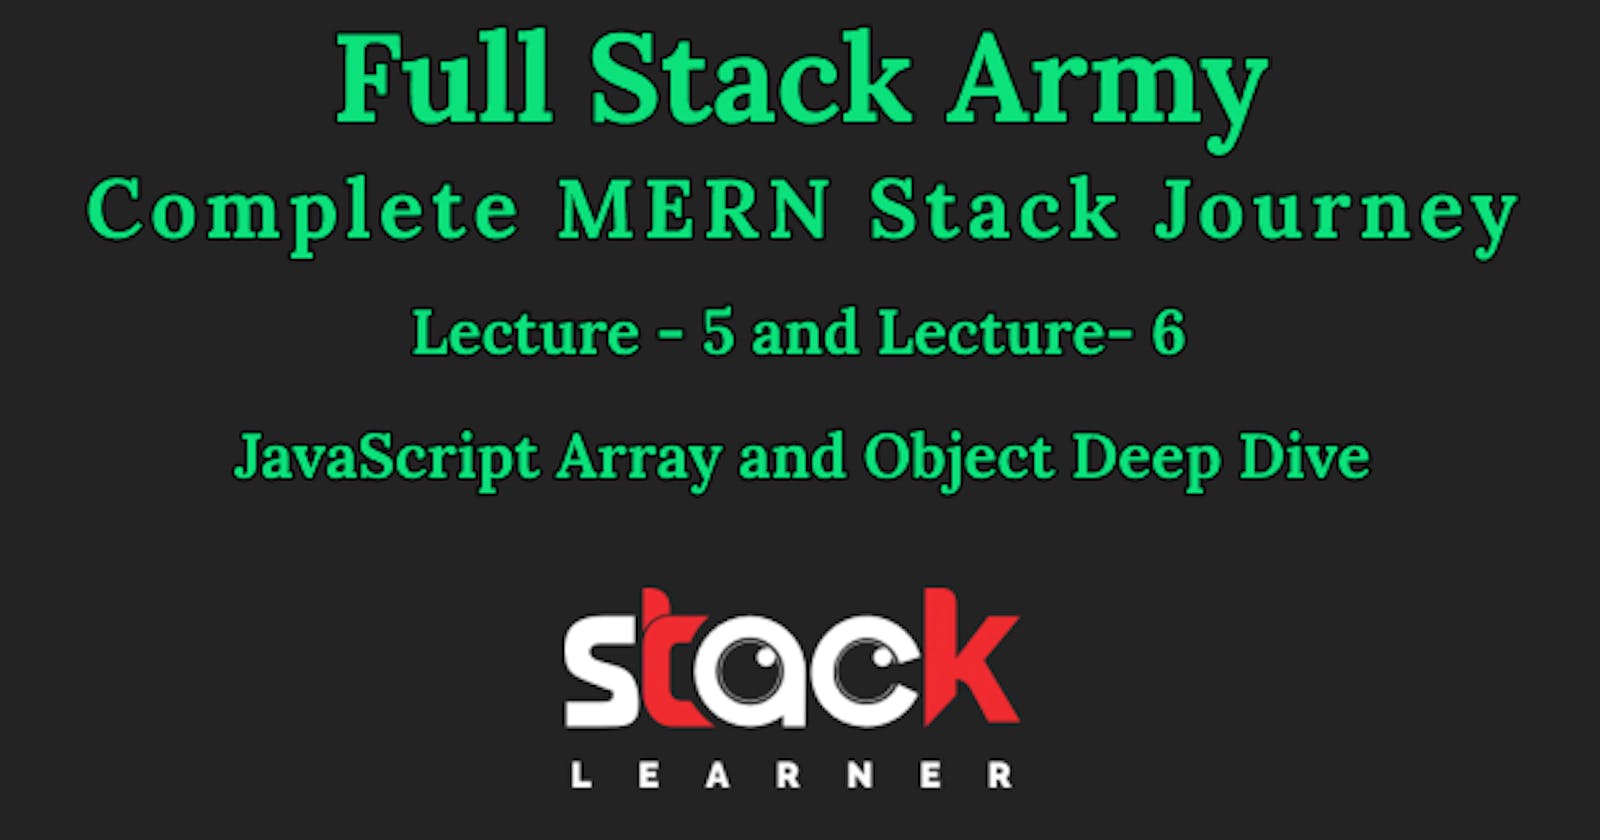 Lecture 5 - Array Operations - Imperative vs Declarative and Lecture 6 - JavaScript Array and Object Deep Dive | Full Stack Army